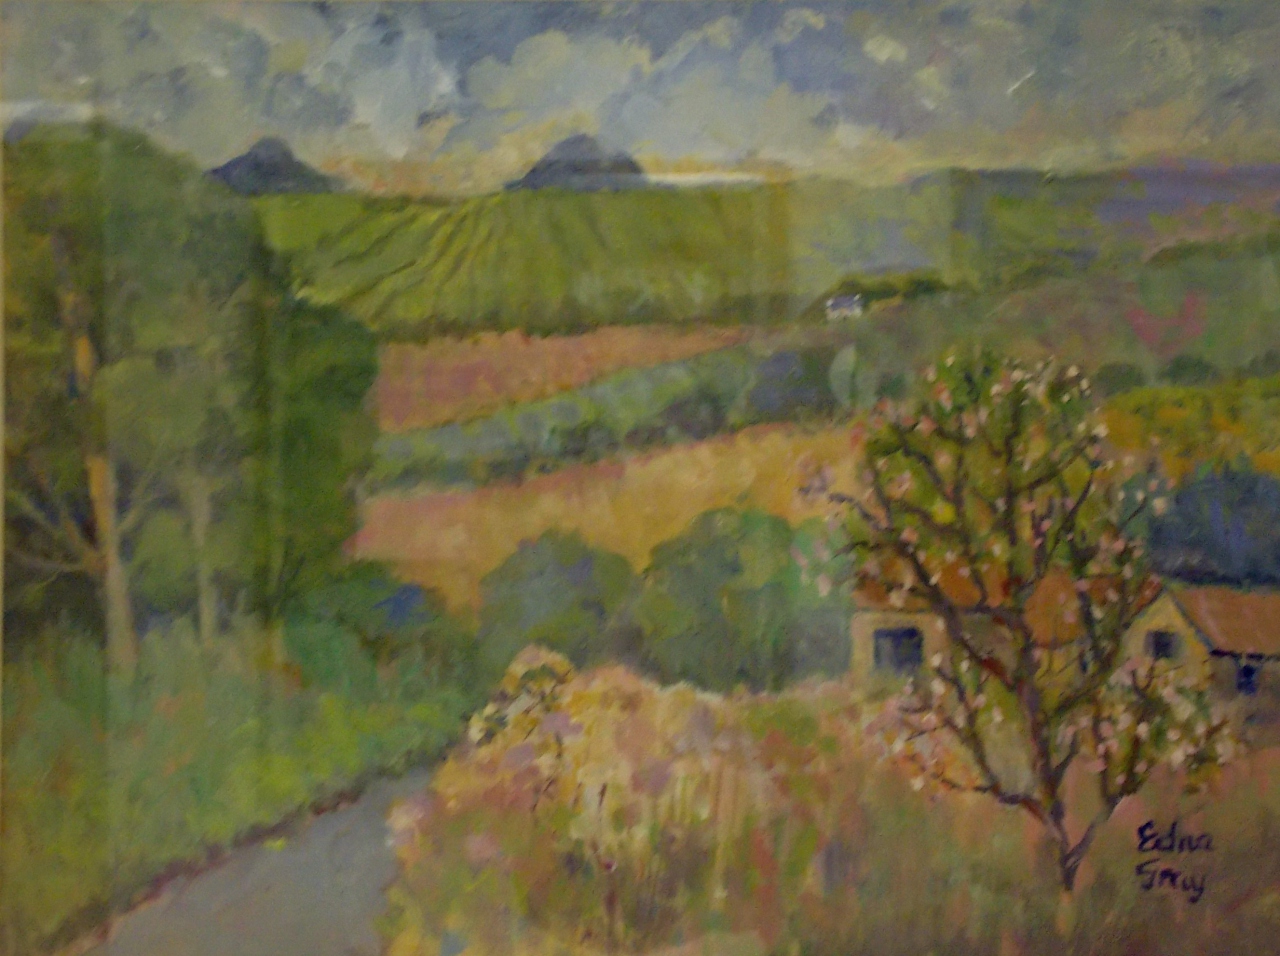 Picture of Landscape with blossom tree by Edna Gray